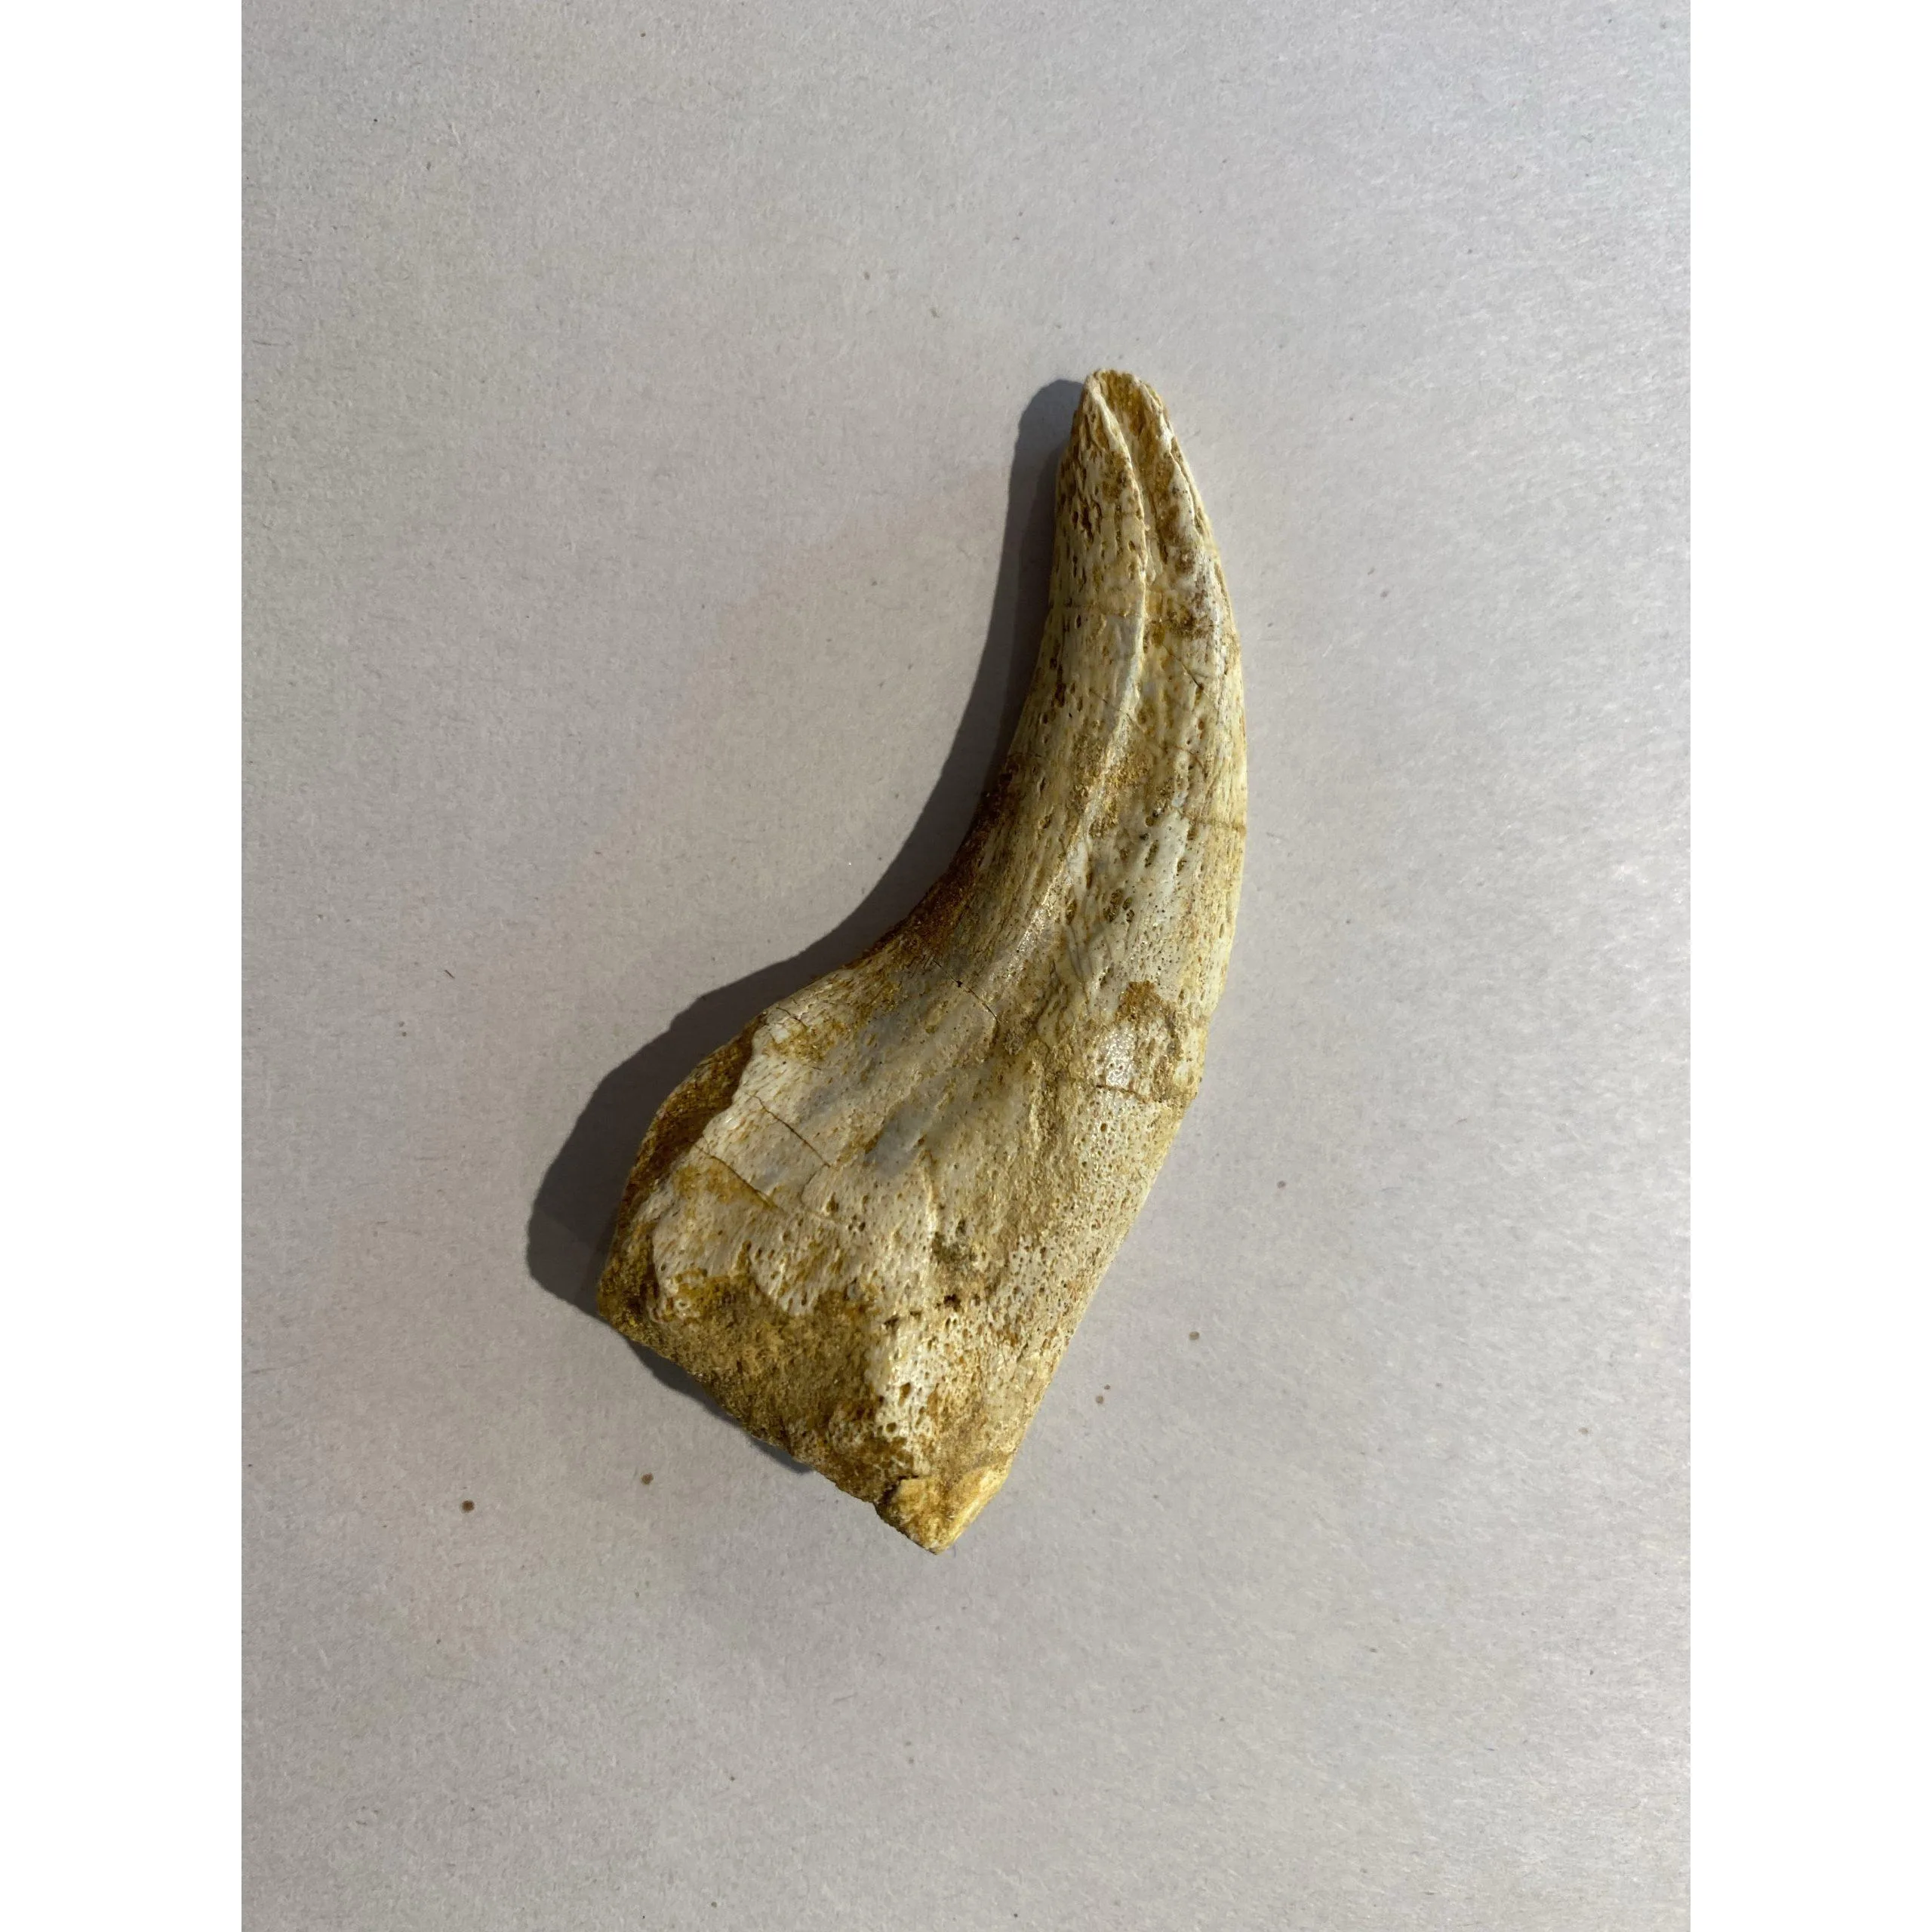 Spinosaurus Claw, Morocco, Gorgeous 3 1/2 inches Prehistoric Online